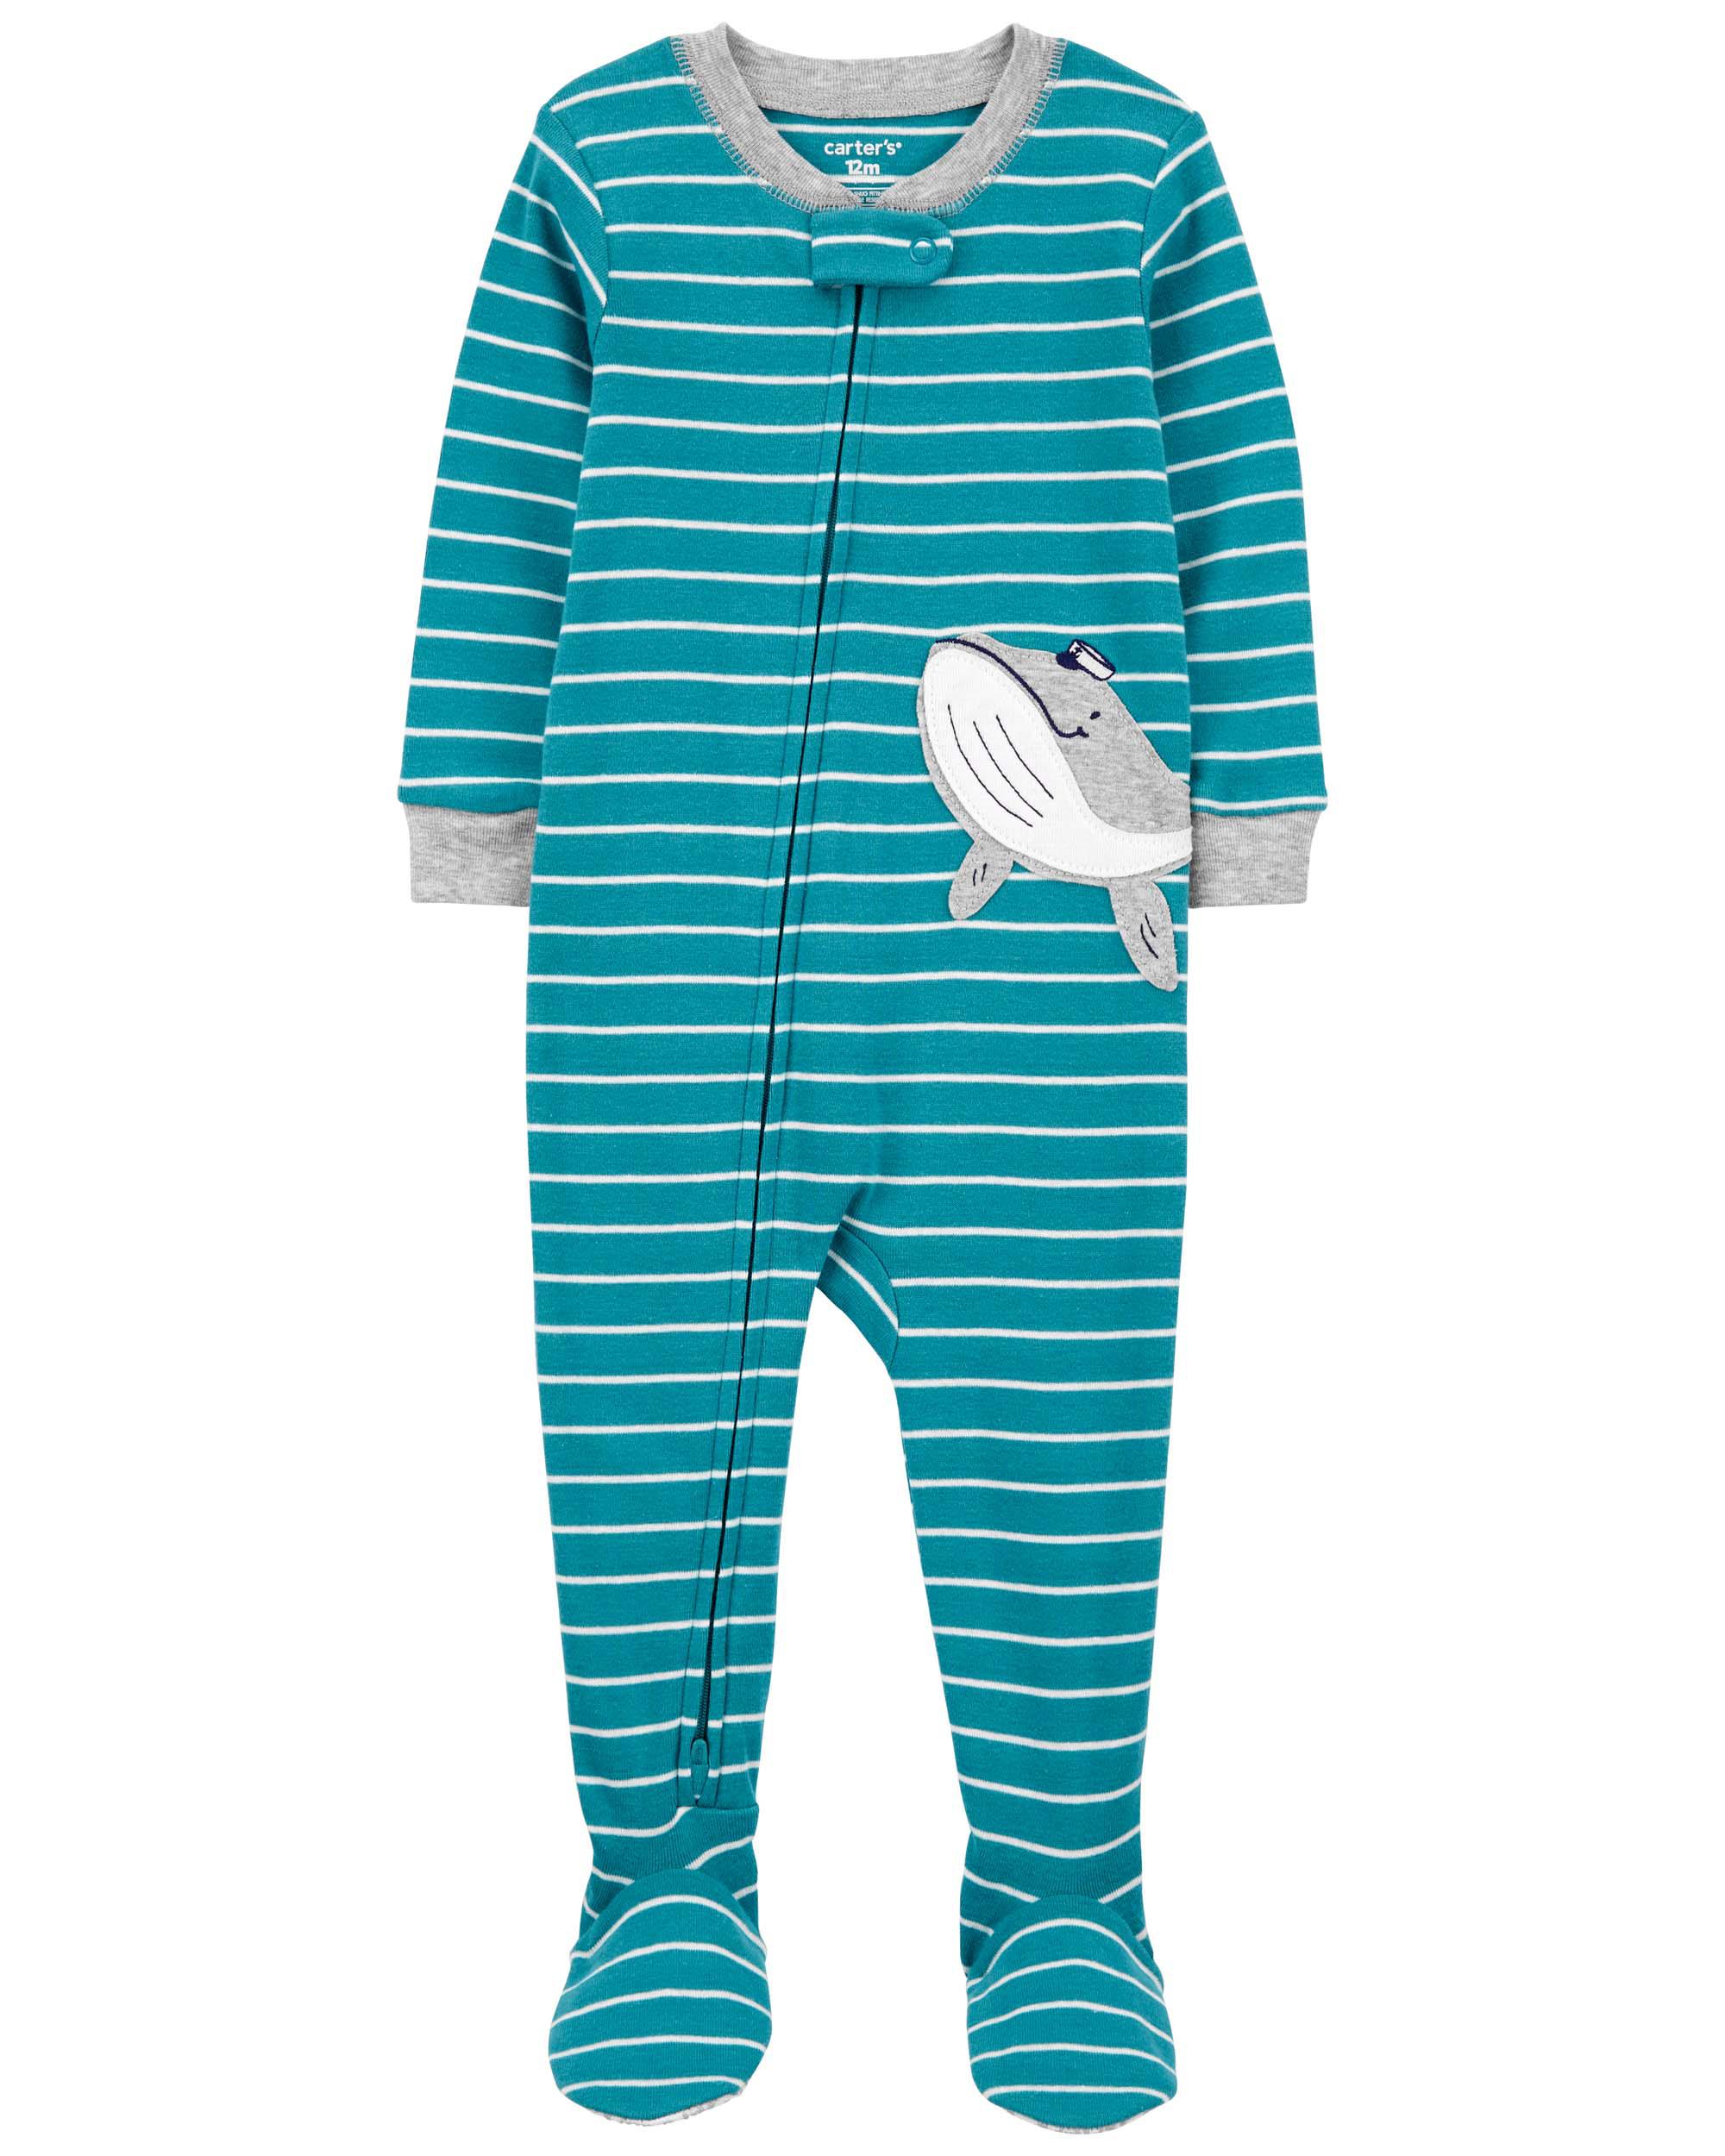 Toddler 1-Piece Striped Whale 100% Snug Fit Cotton Footed Pyjamas